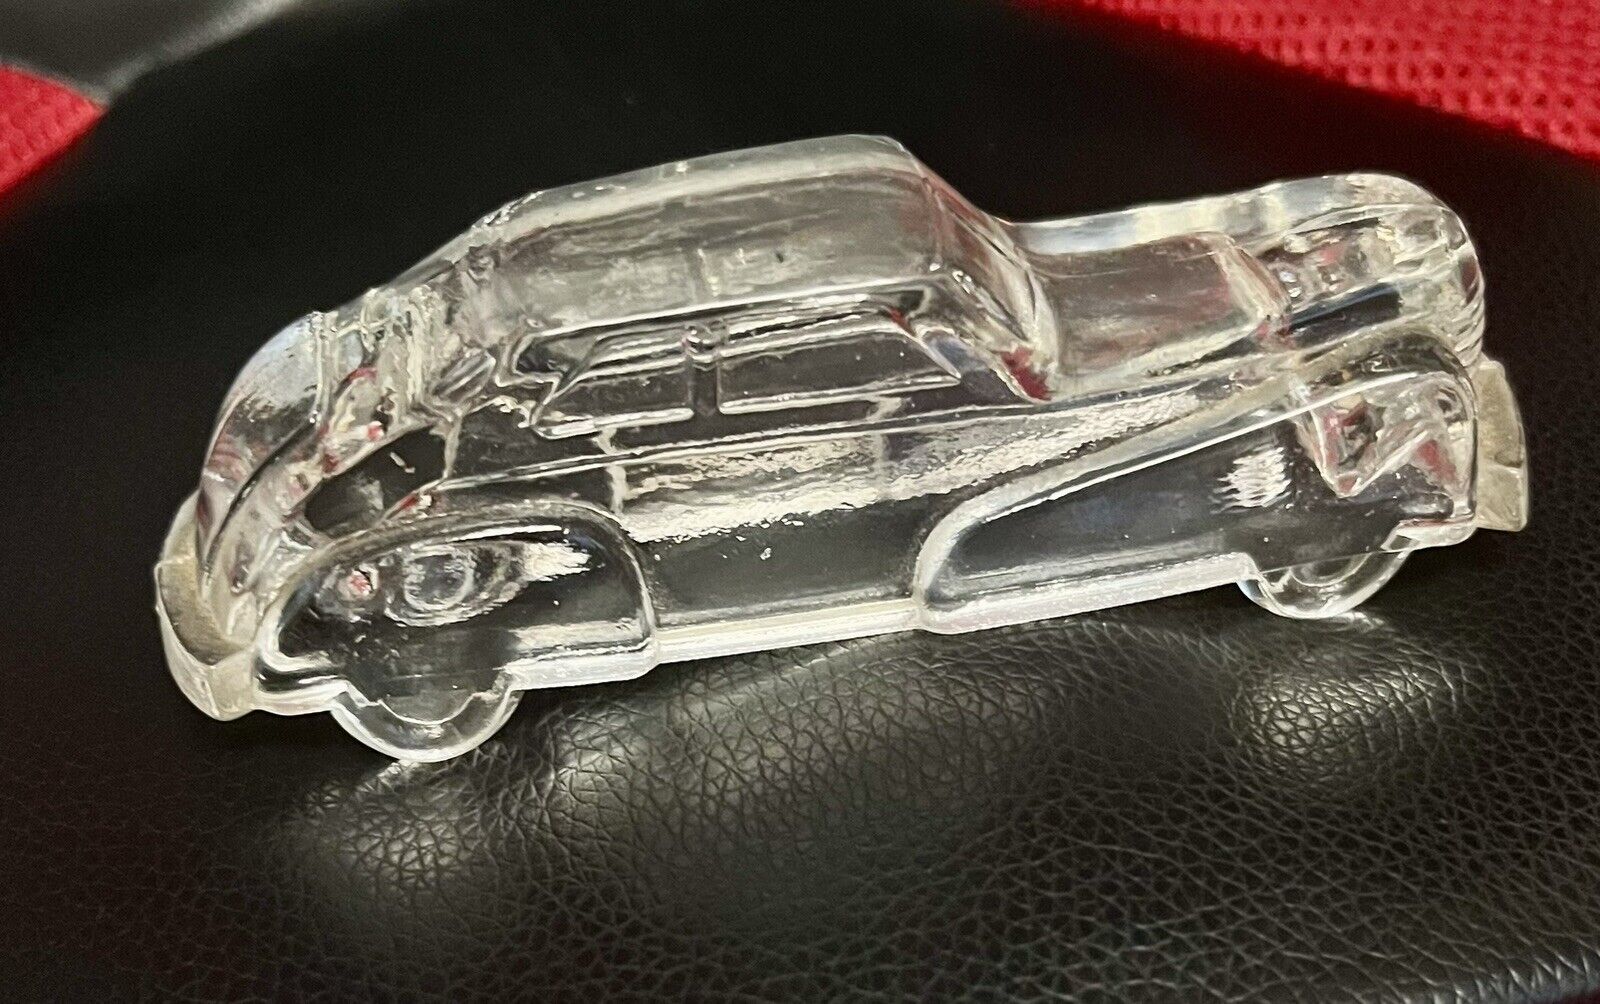 Antique Vintage Glass Car Candy Container - Late 1930s Style DeSoto? Packard?